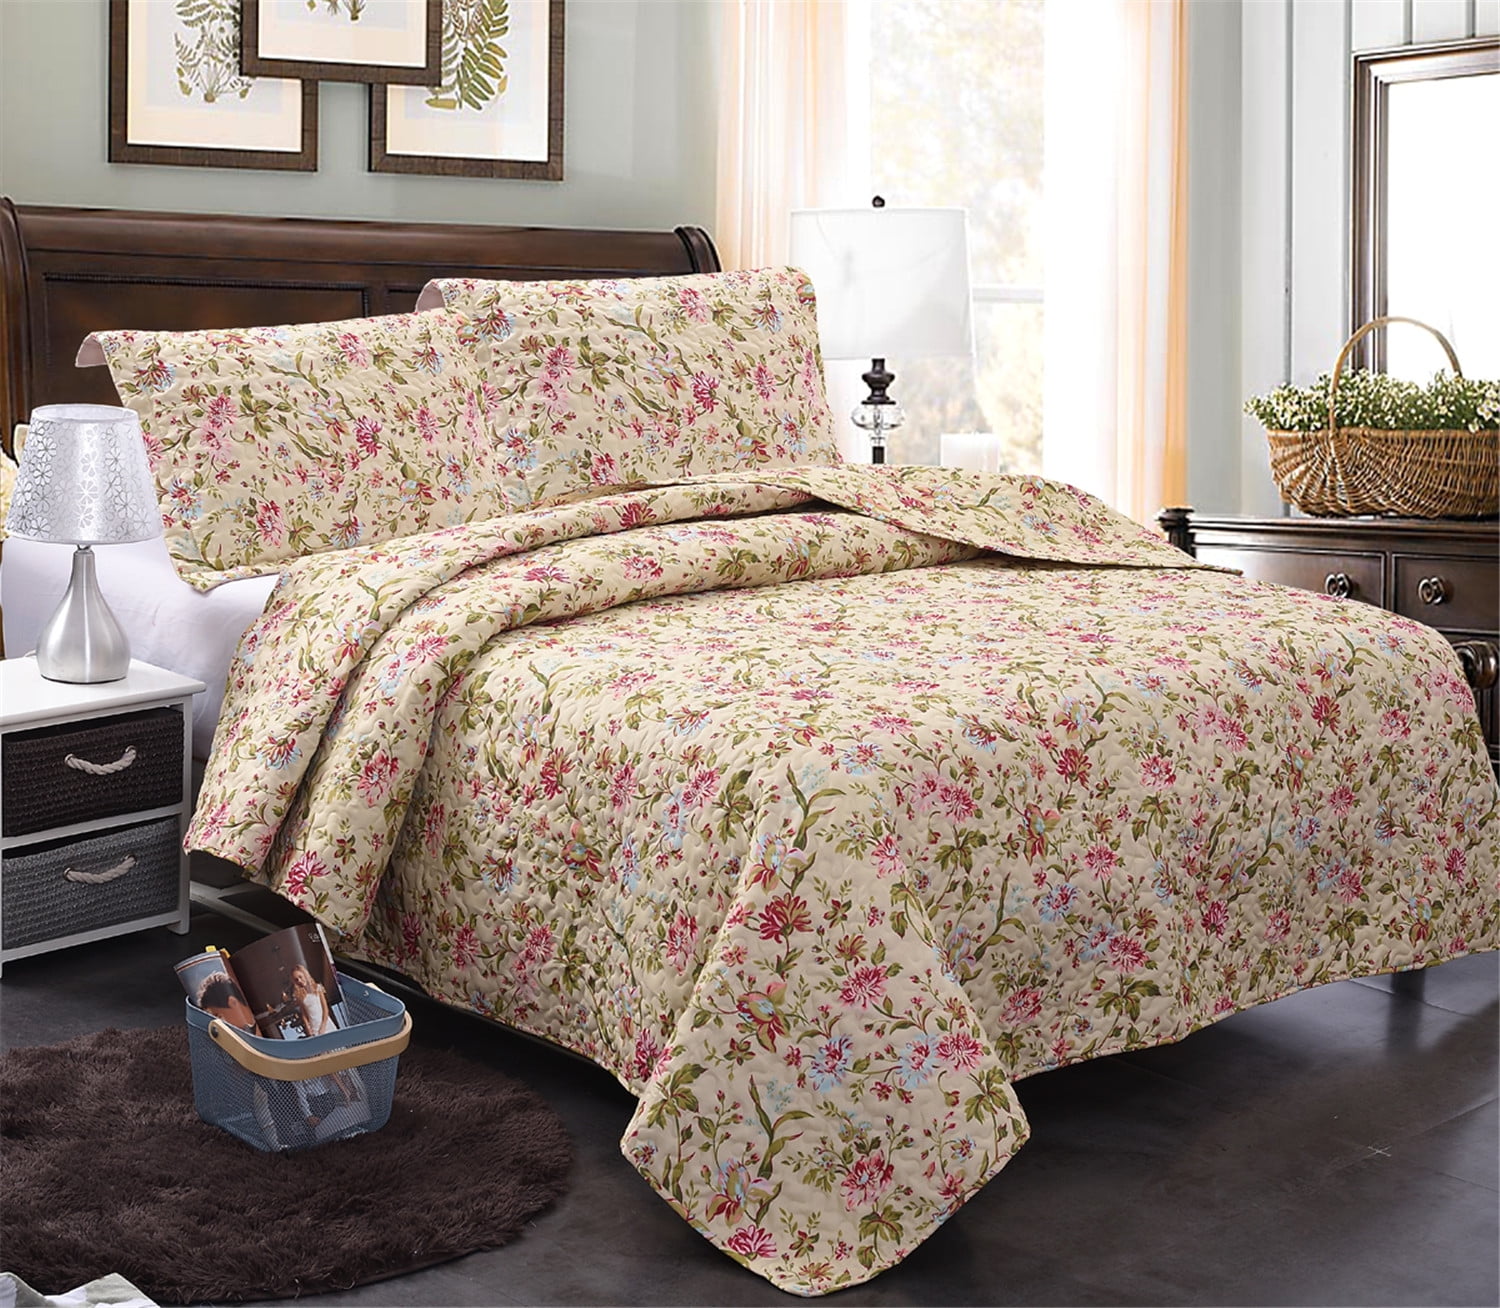 FLOWERS PATCHWORK PRINTED REVERSIBLE BEDSPREAD QUILTED SET 3 PCS QUEEN SIZE 